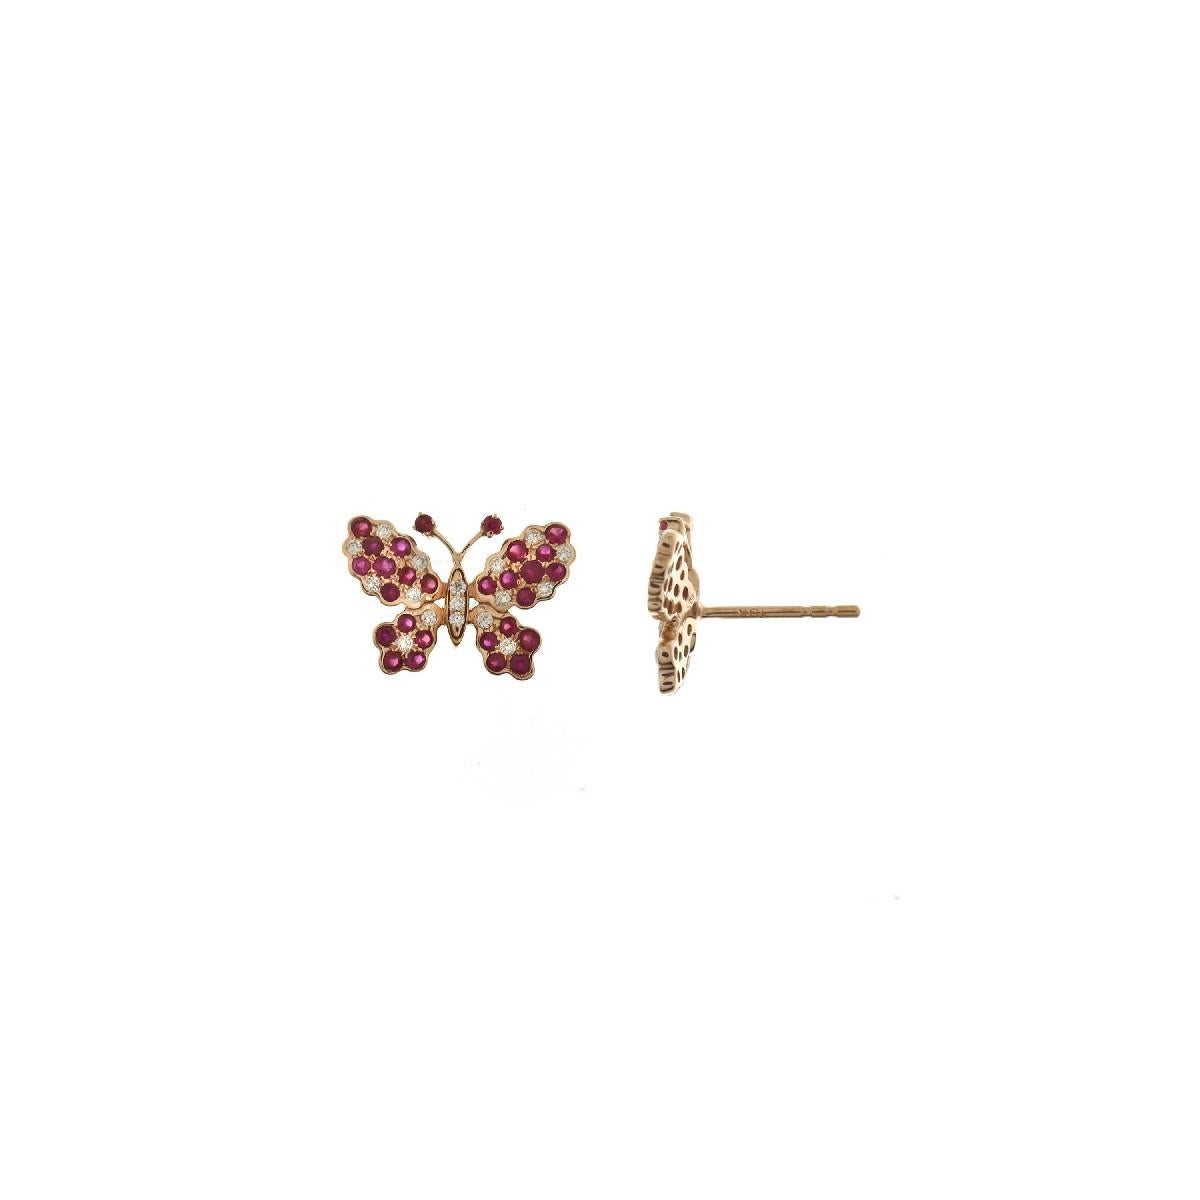 Diamonds, Ruby & 18K Gold Butterfly Earrings
Butterfly Collection... everyday wearable earrings 
Irama Pradera is a dynamic and outgoing designer from Spain that searches always for the best gems and combines classic with contemporary mounting and